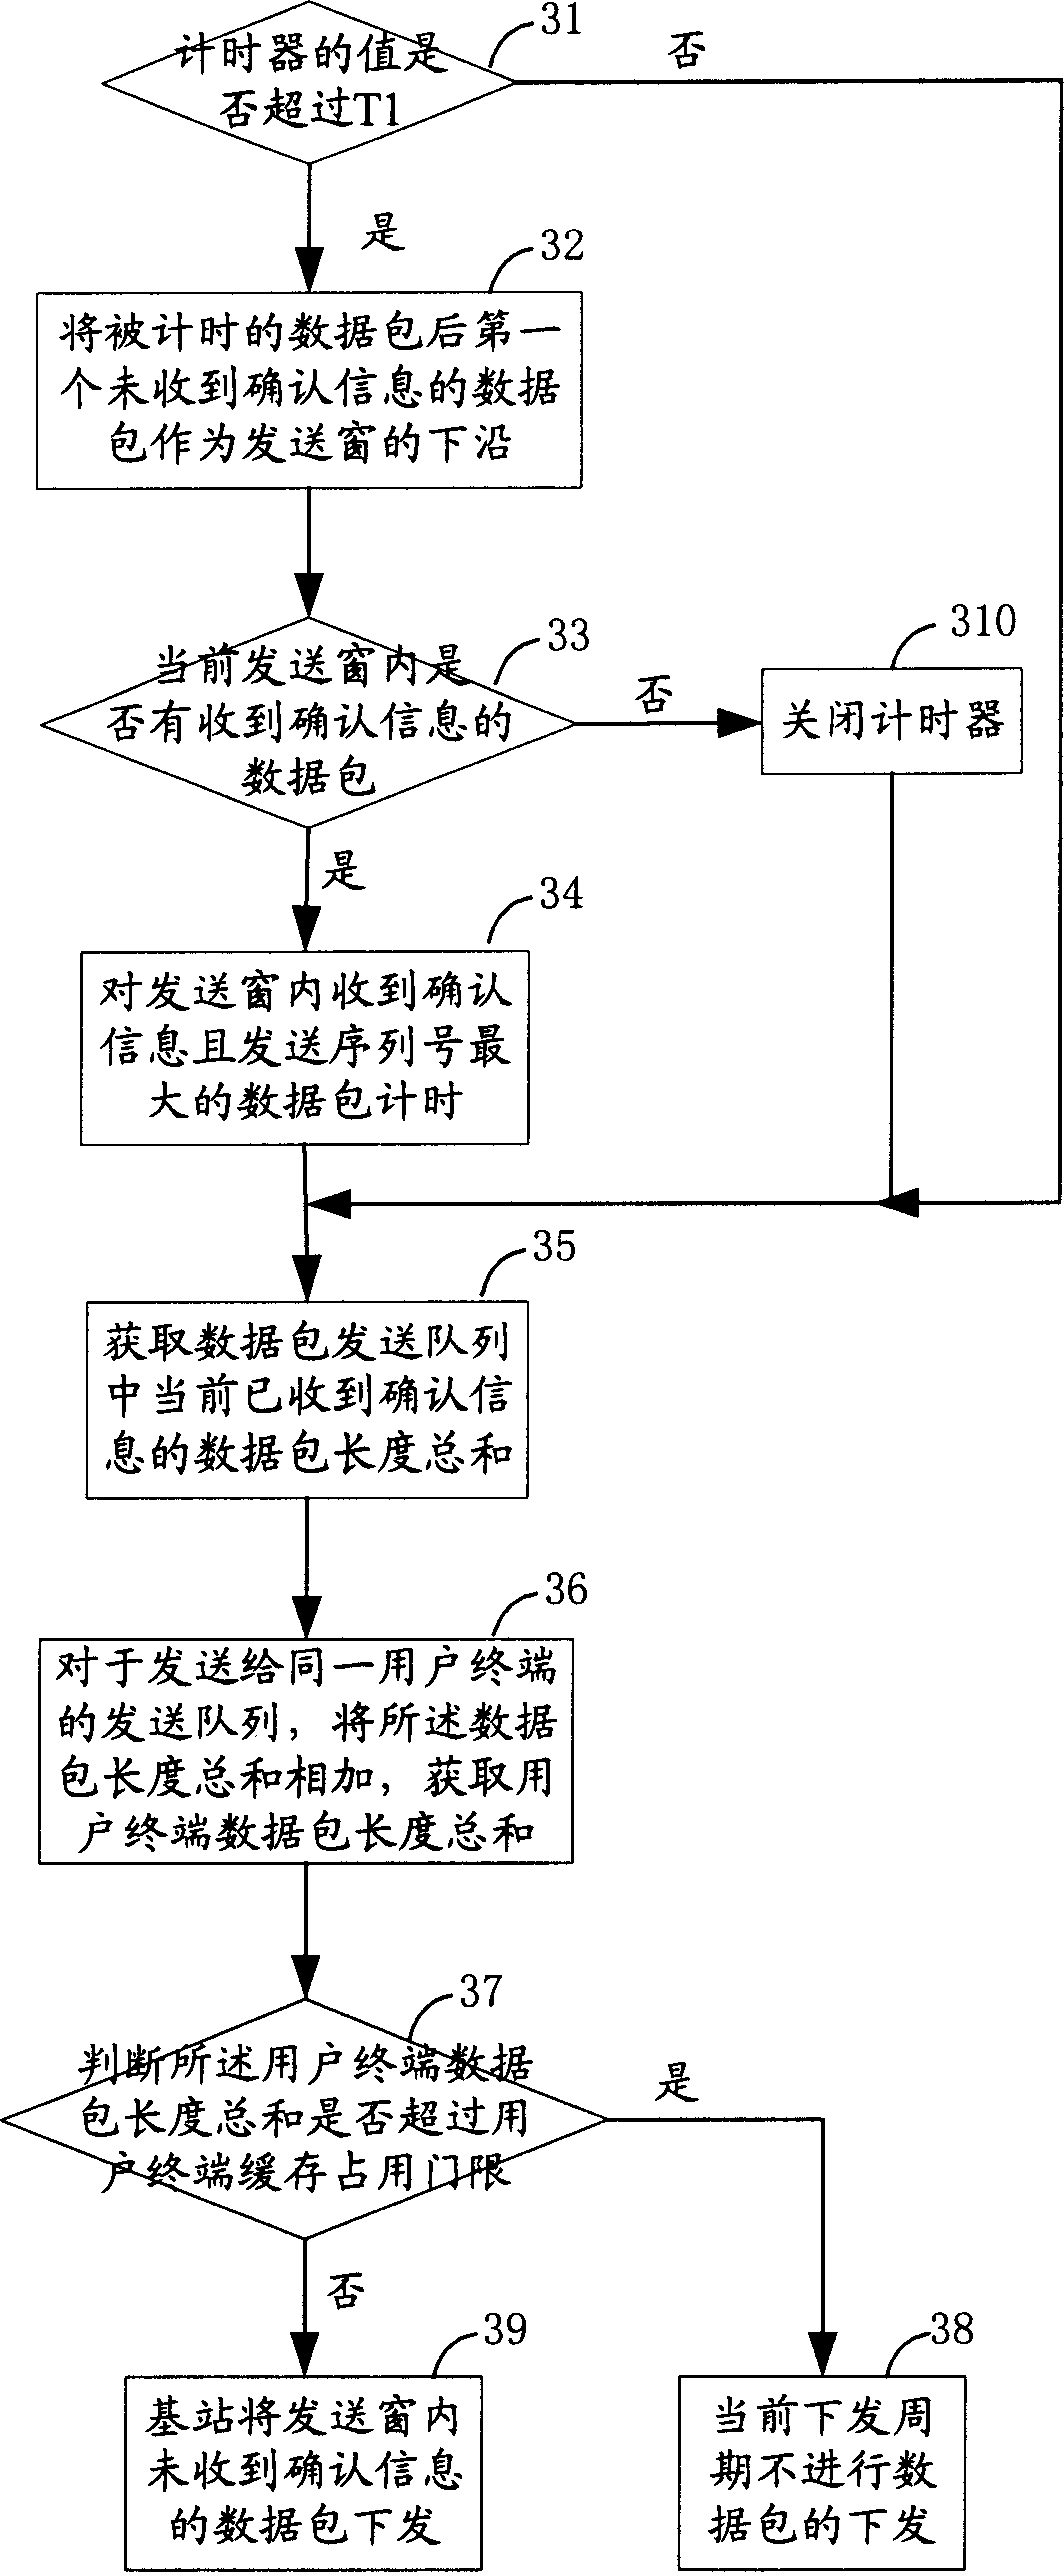 Method for information interaction between base station and user terminal